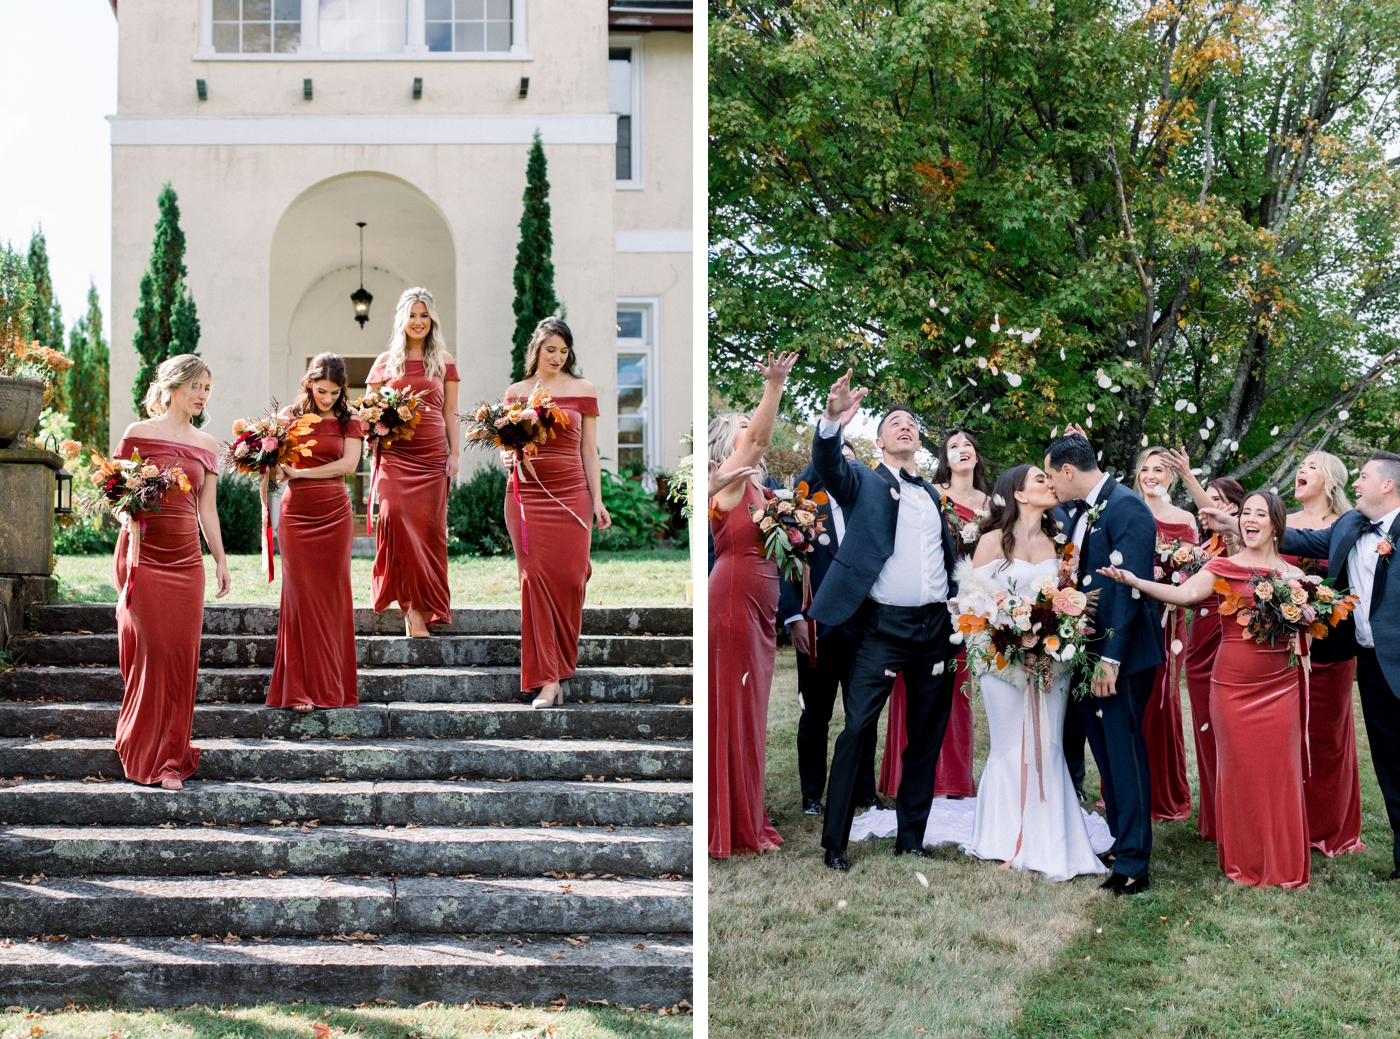 Bridesmaids in velvet rust colored gowns